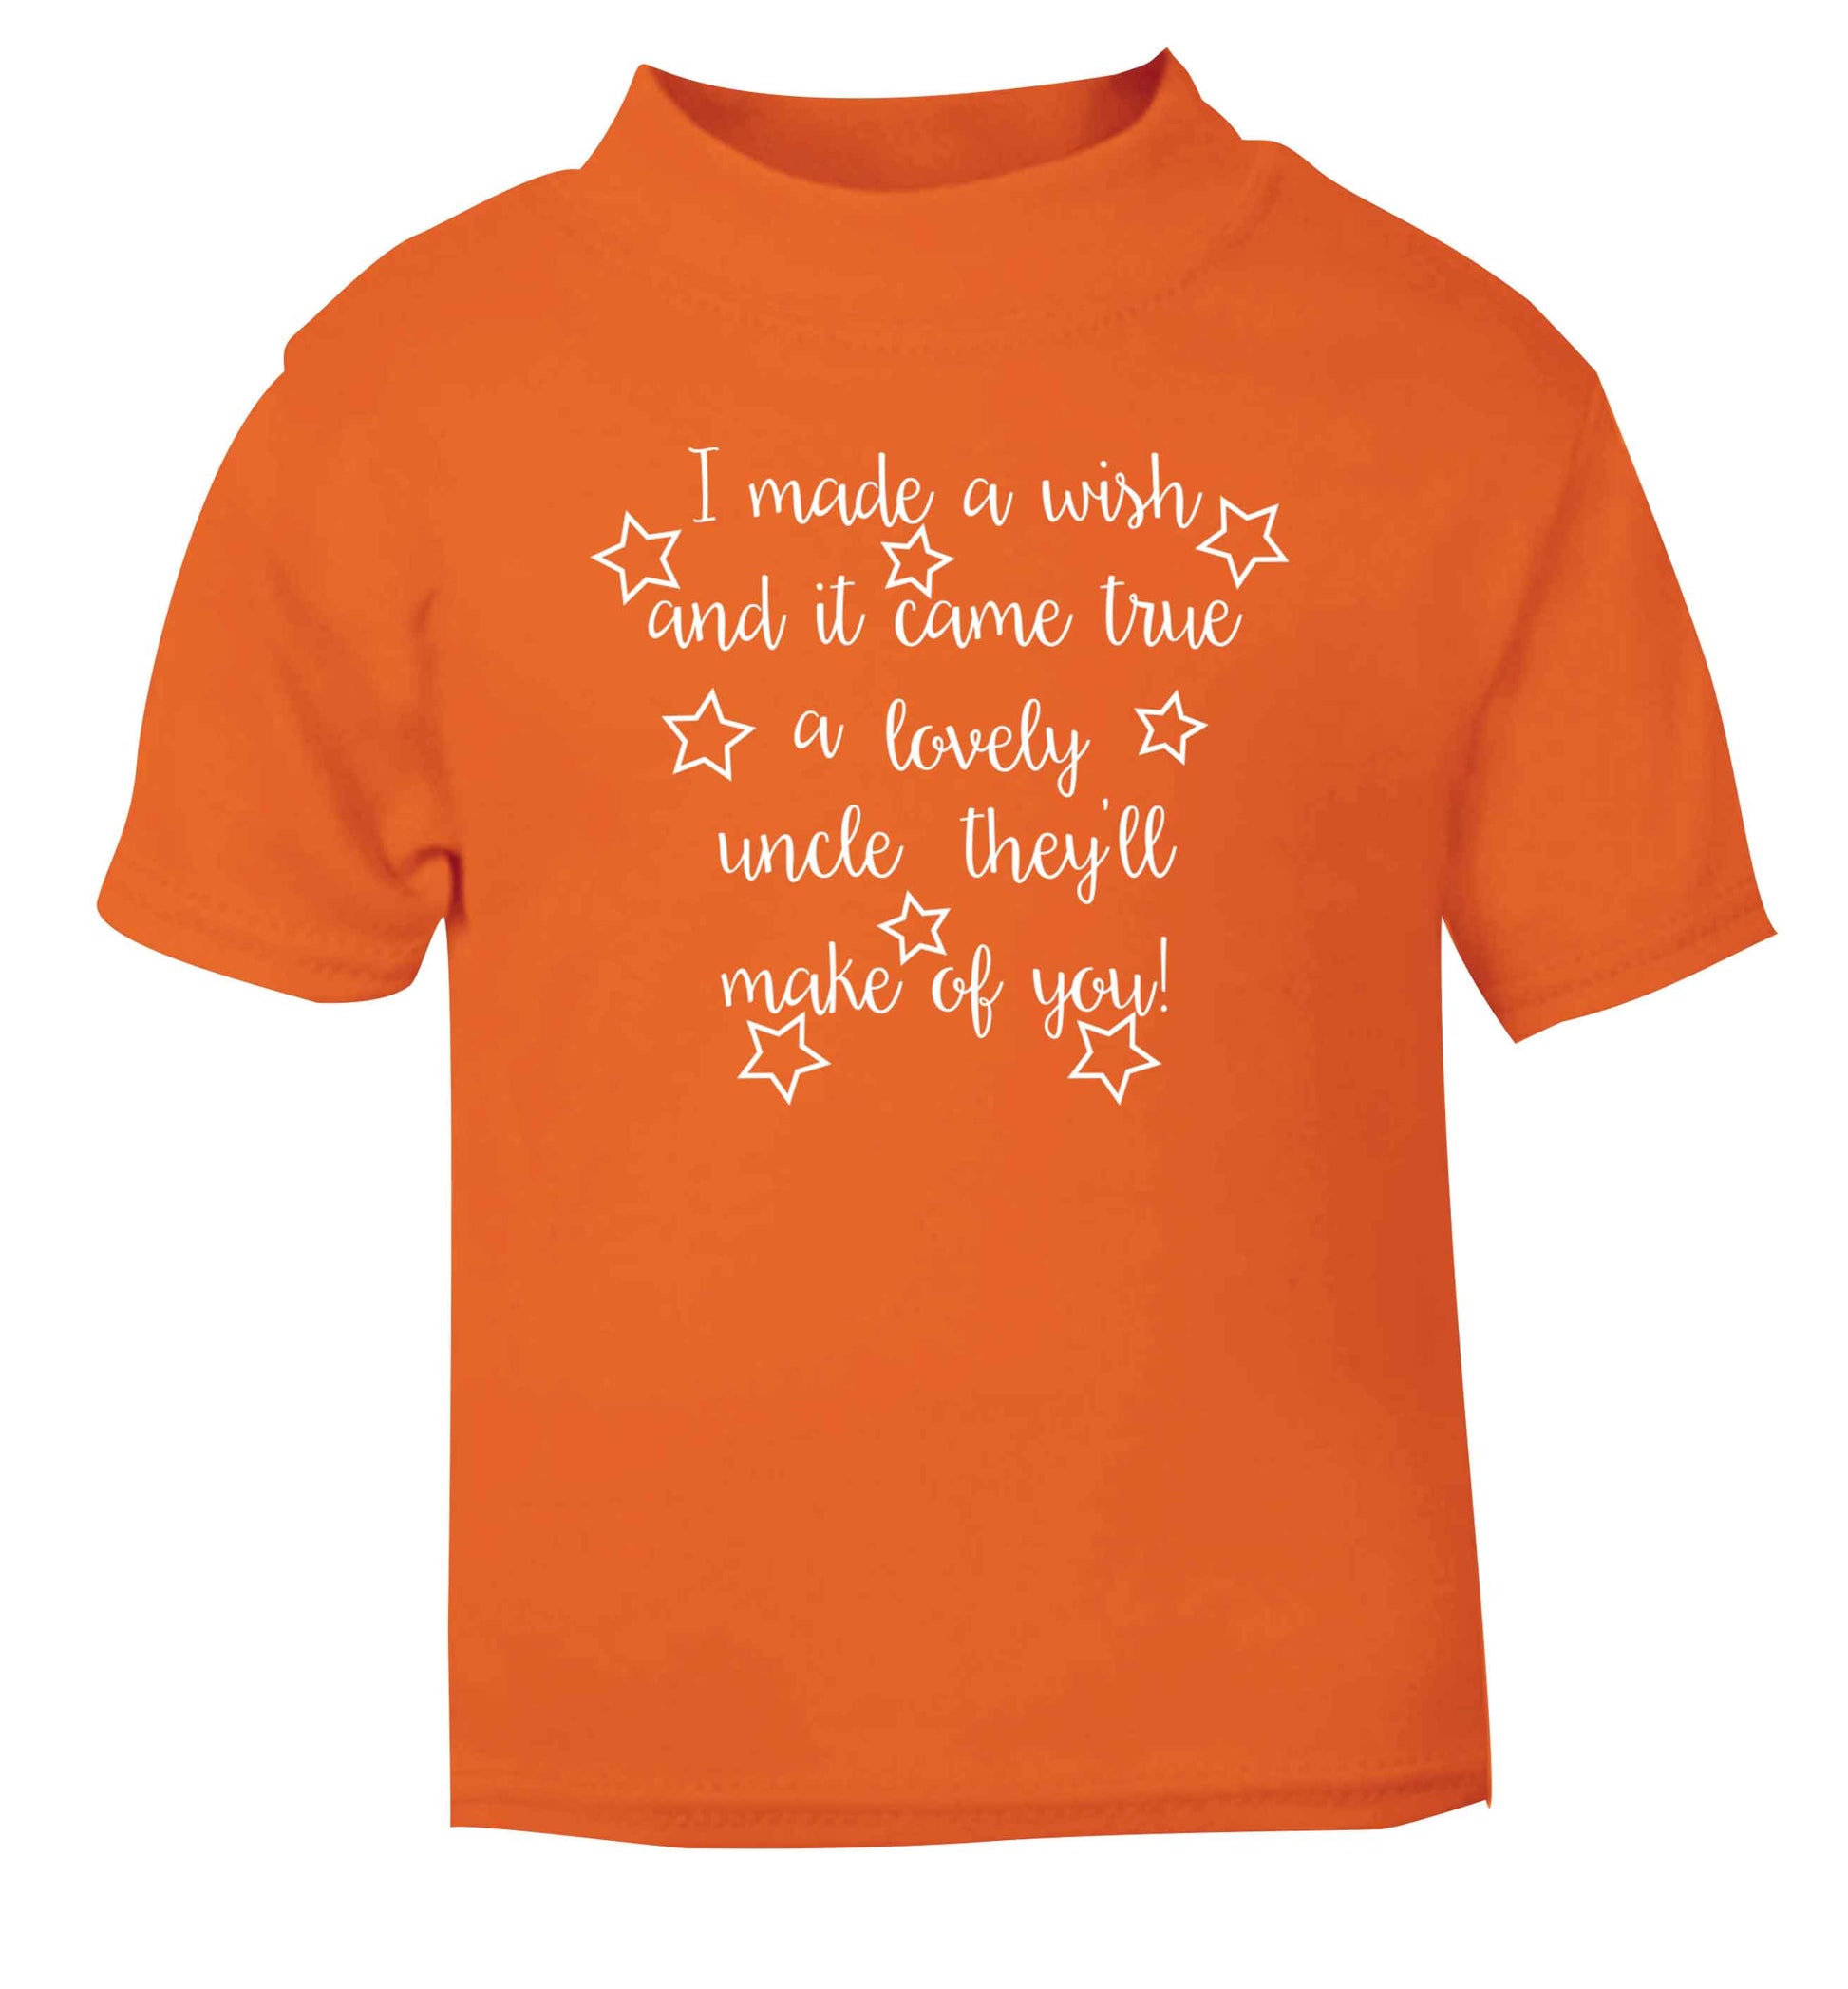 I made a wish and it came true a lovely uncle they'll make of you! orange Baby Toddler Tshirt 2 Years